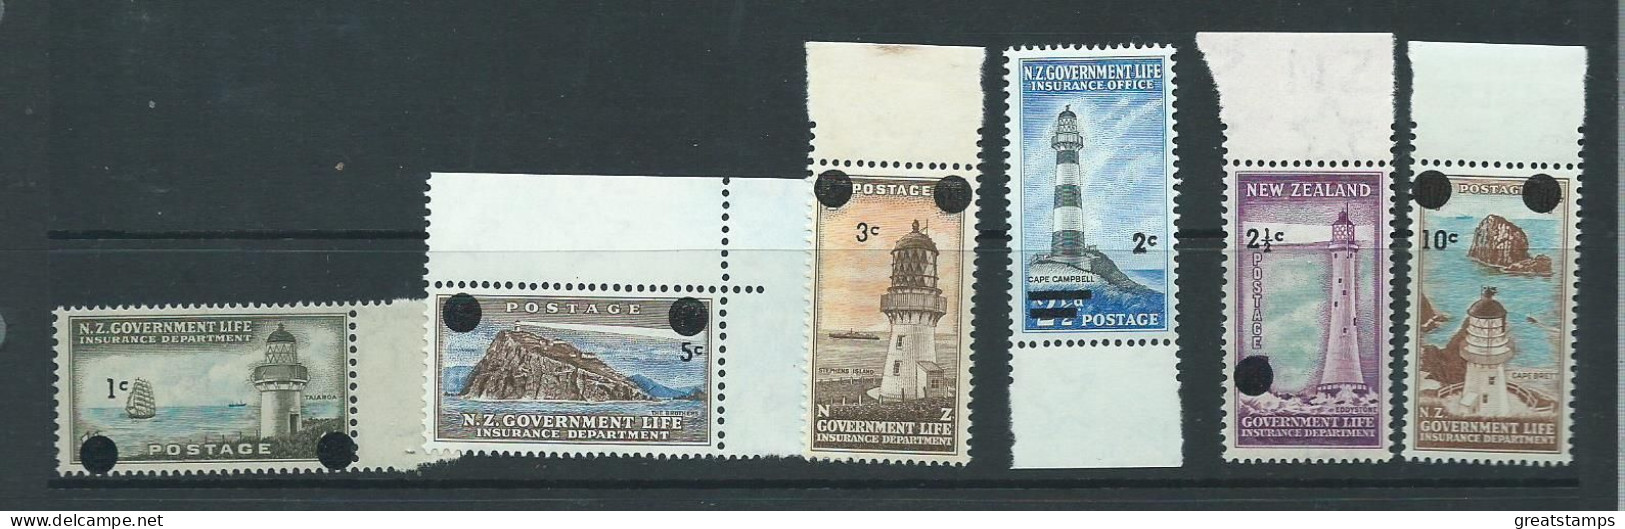 New Zealand Stamps Life Insurance Lighthouse1967 Mnh Set Surcharges - Neufs